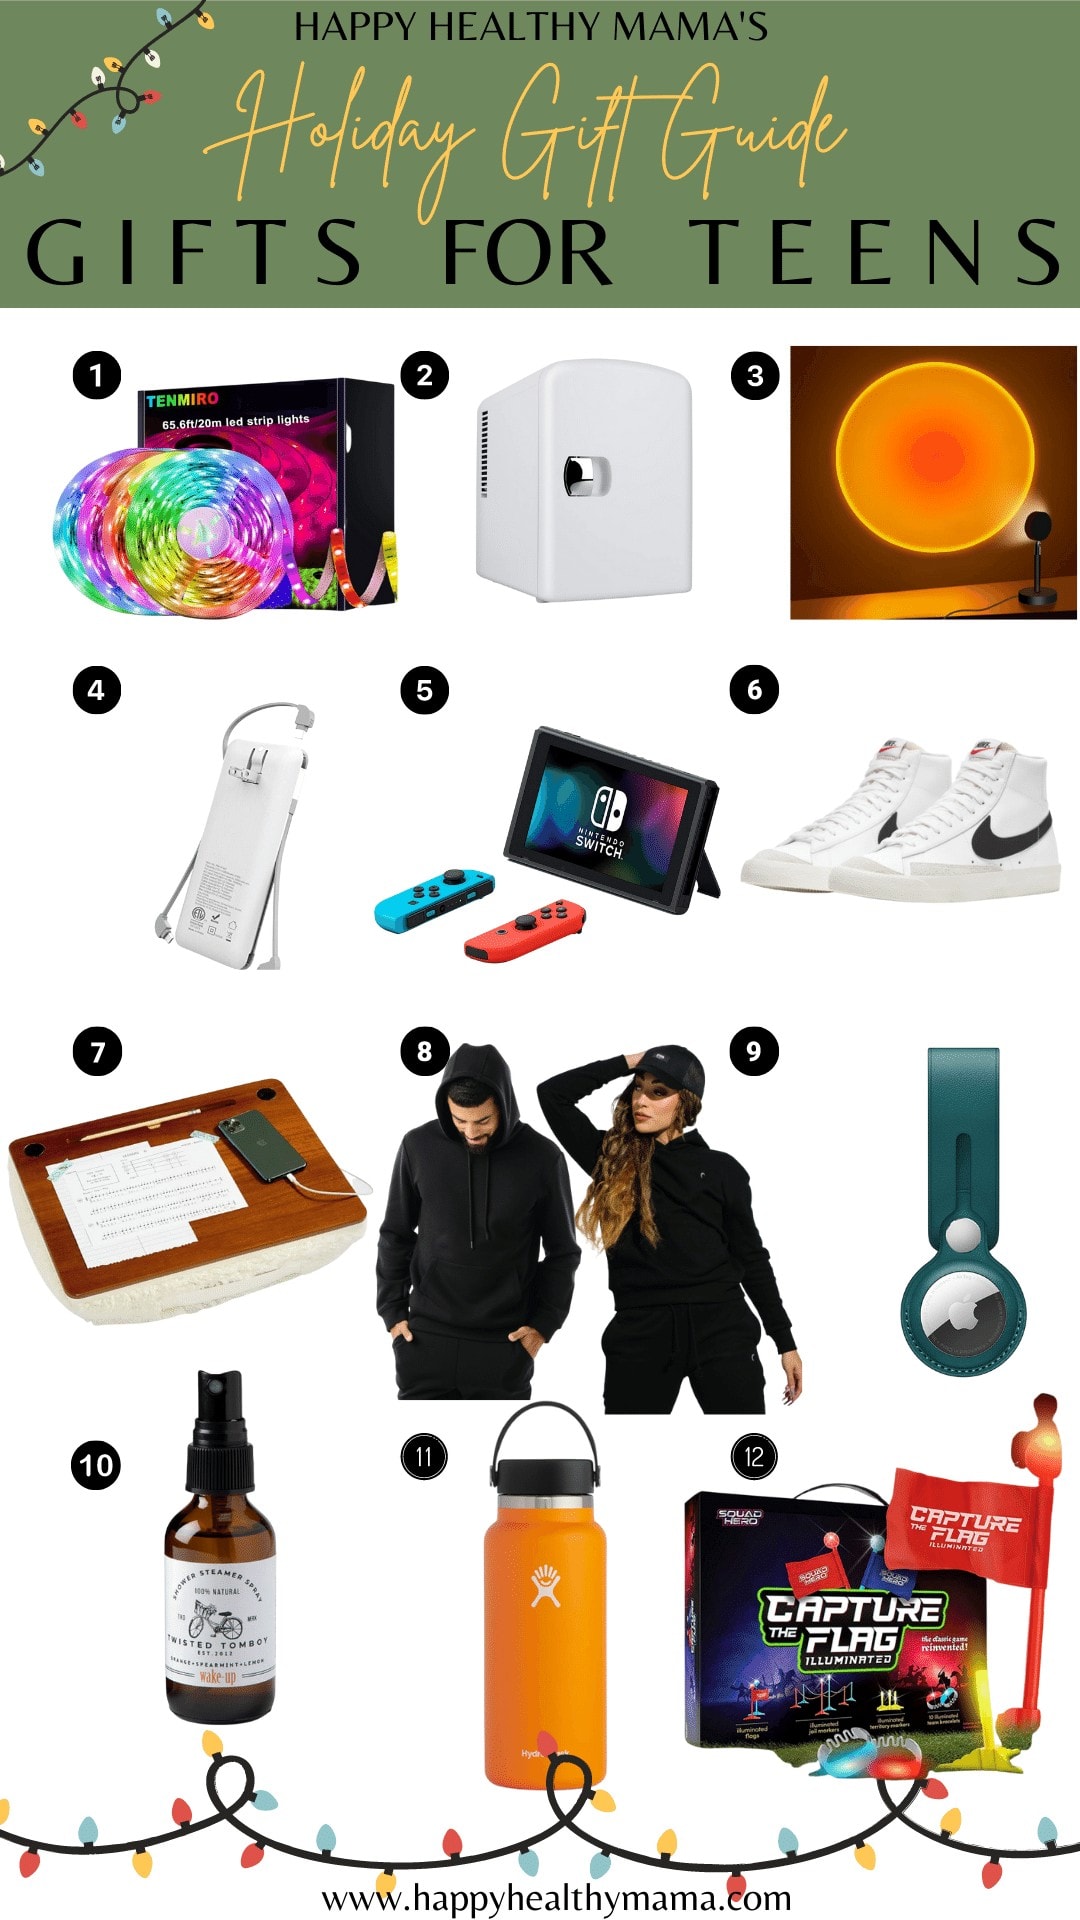 Best Christmas gifts for teens: Best gifts for teenagers